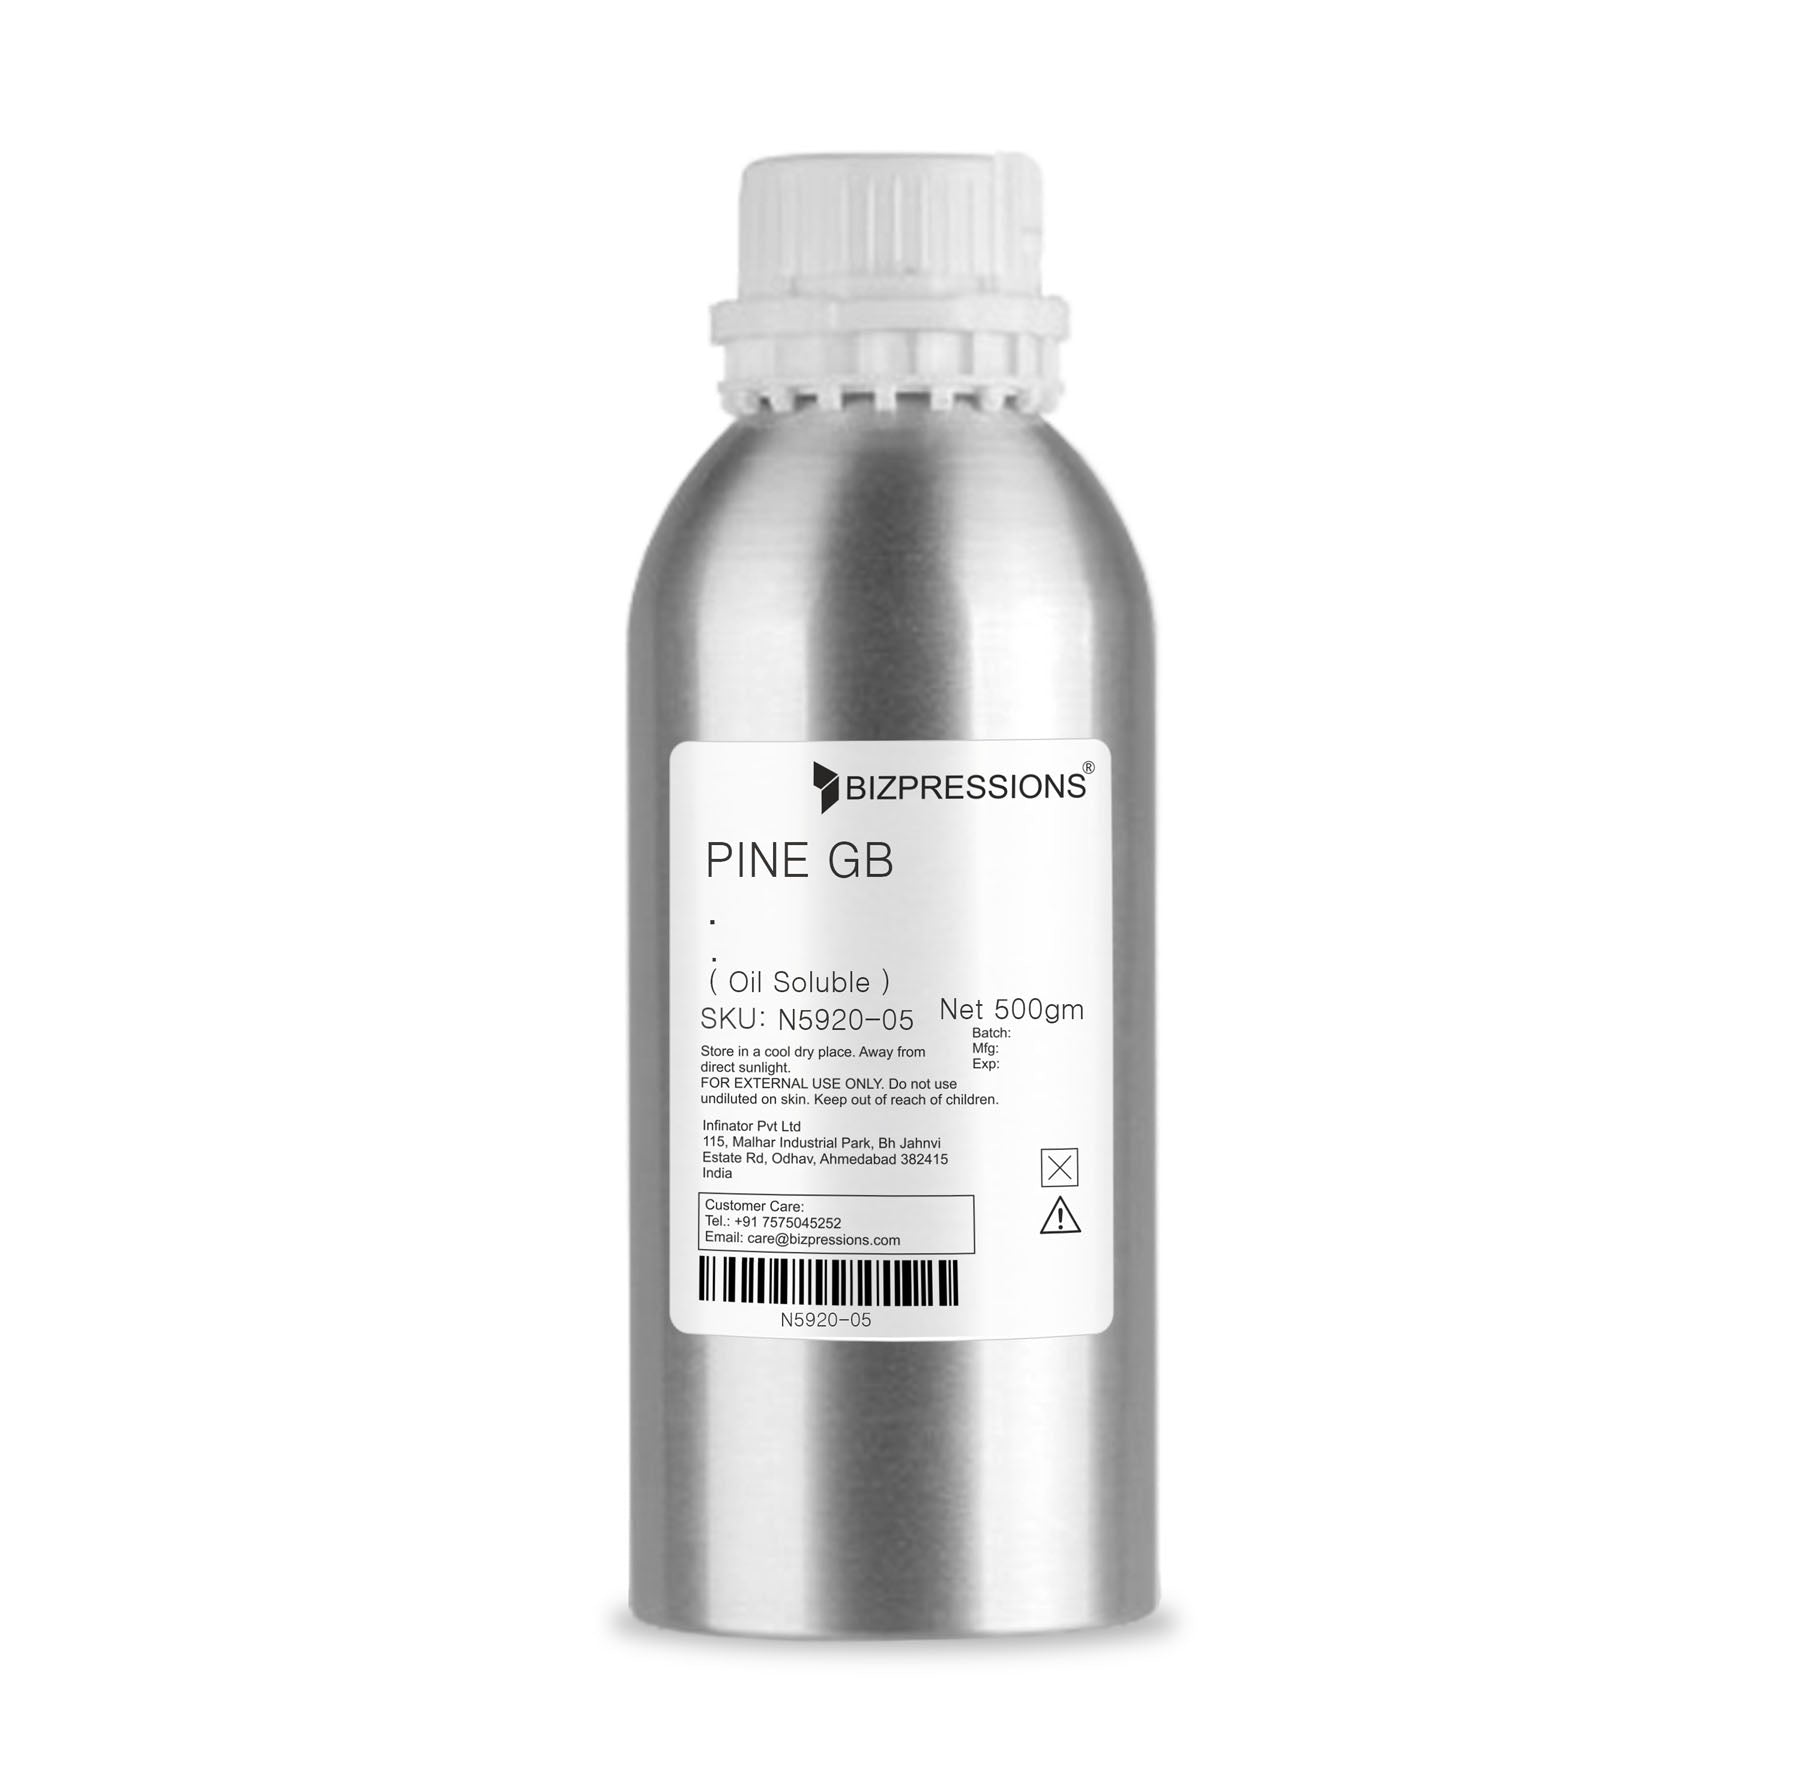 PINE GB - Fragrance ( Oil Soluble ) - 500 gm